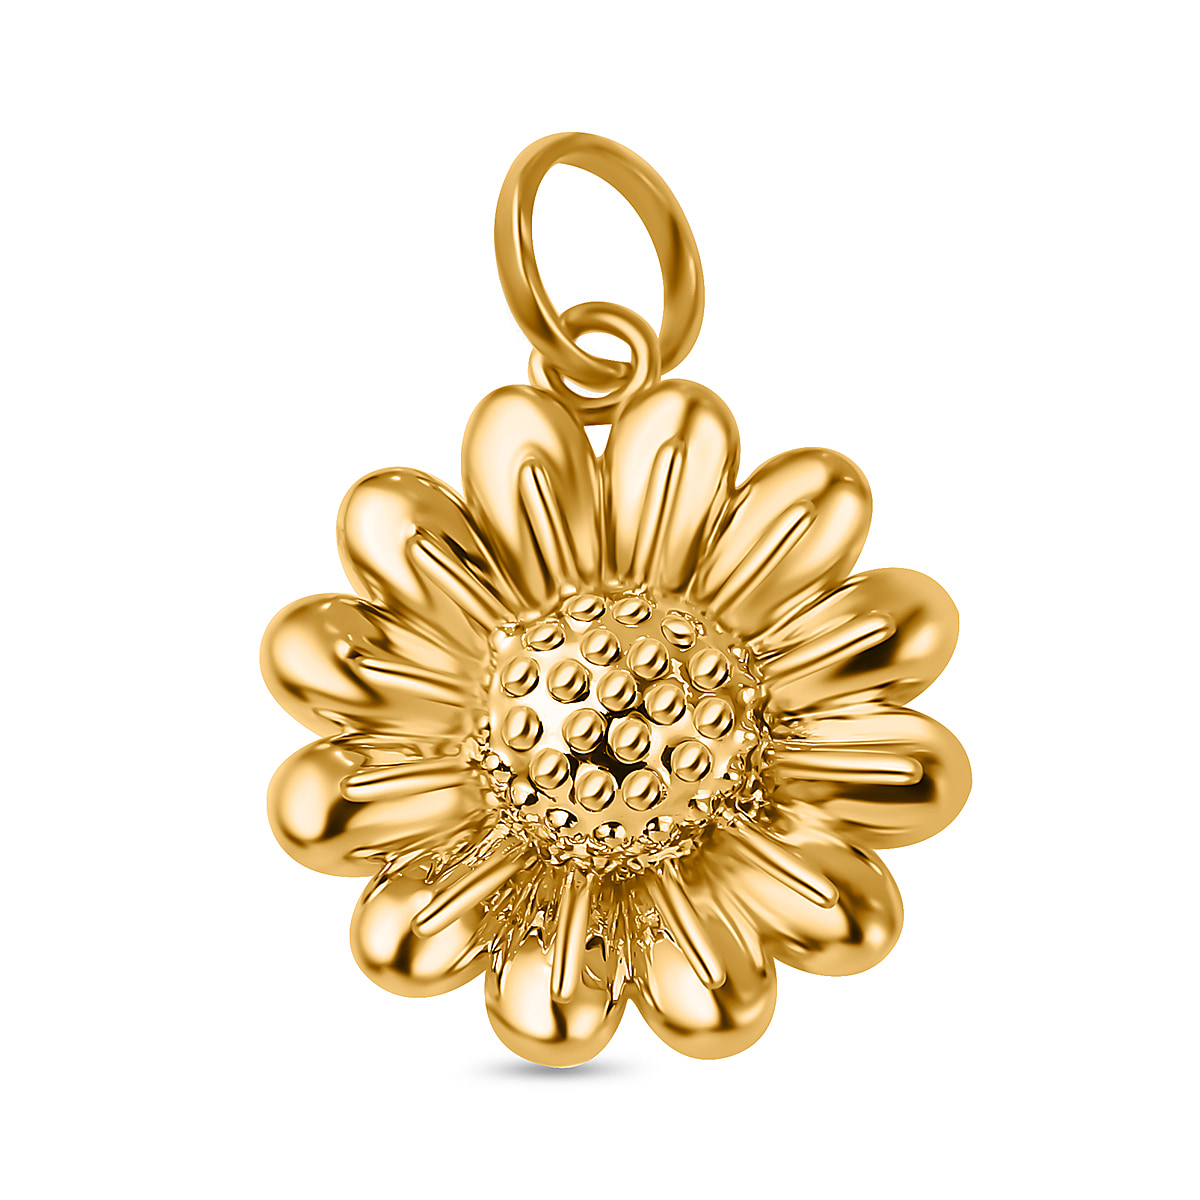 One Time Closeout - 22K (91.6% Purity) Yellow Gold Pendant